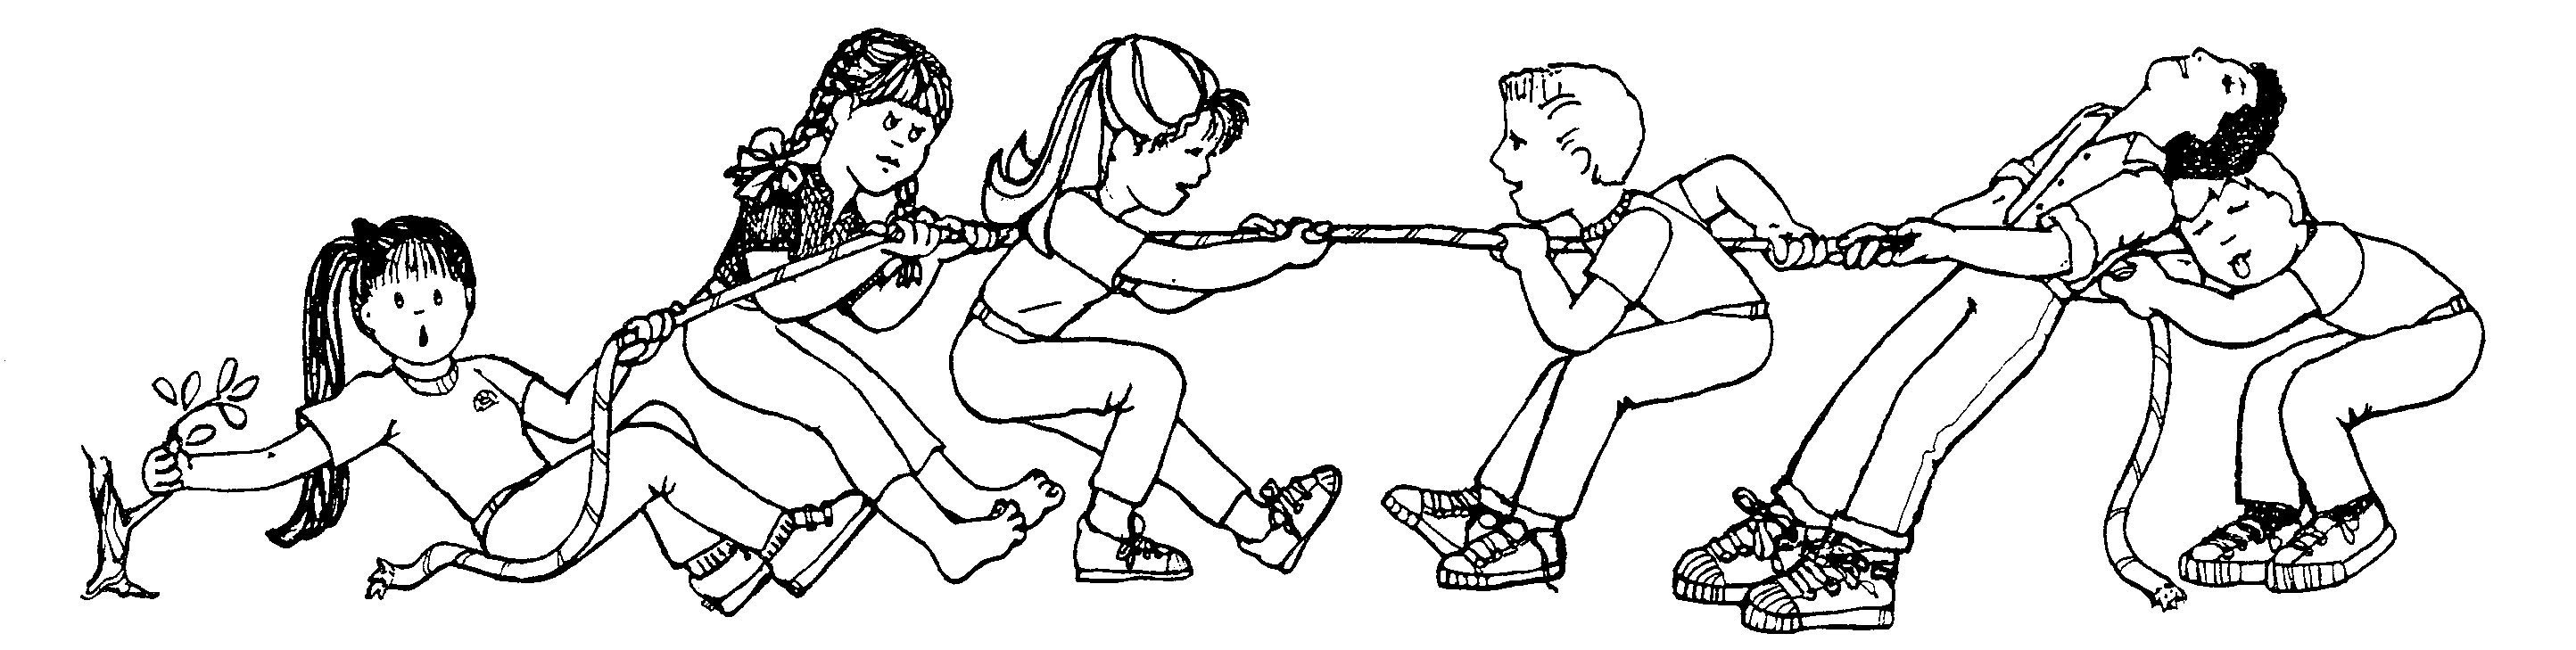 Girls Tug Of War Clipart - Tug Of War Black And White, Transparent background PNG HD thumbnail